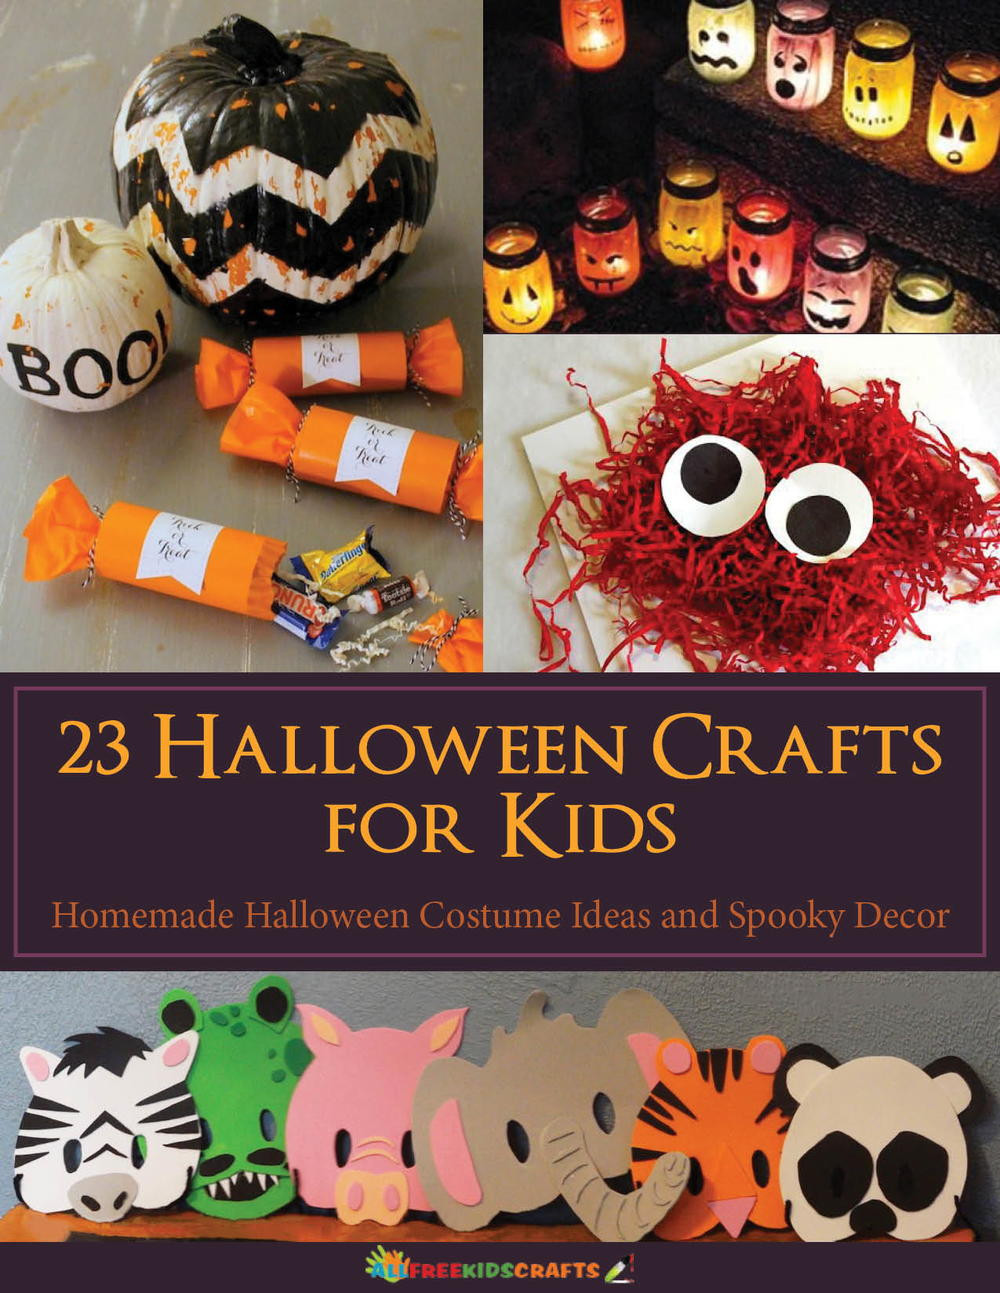 DIY Halloween Crafts For Toddlers
 23 Halloween Crafts for Kids Homemade Halloween Costume